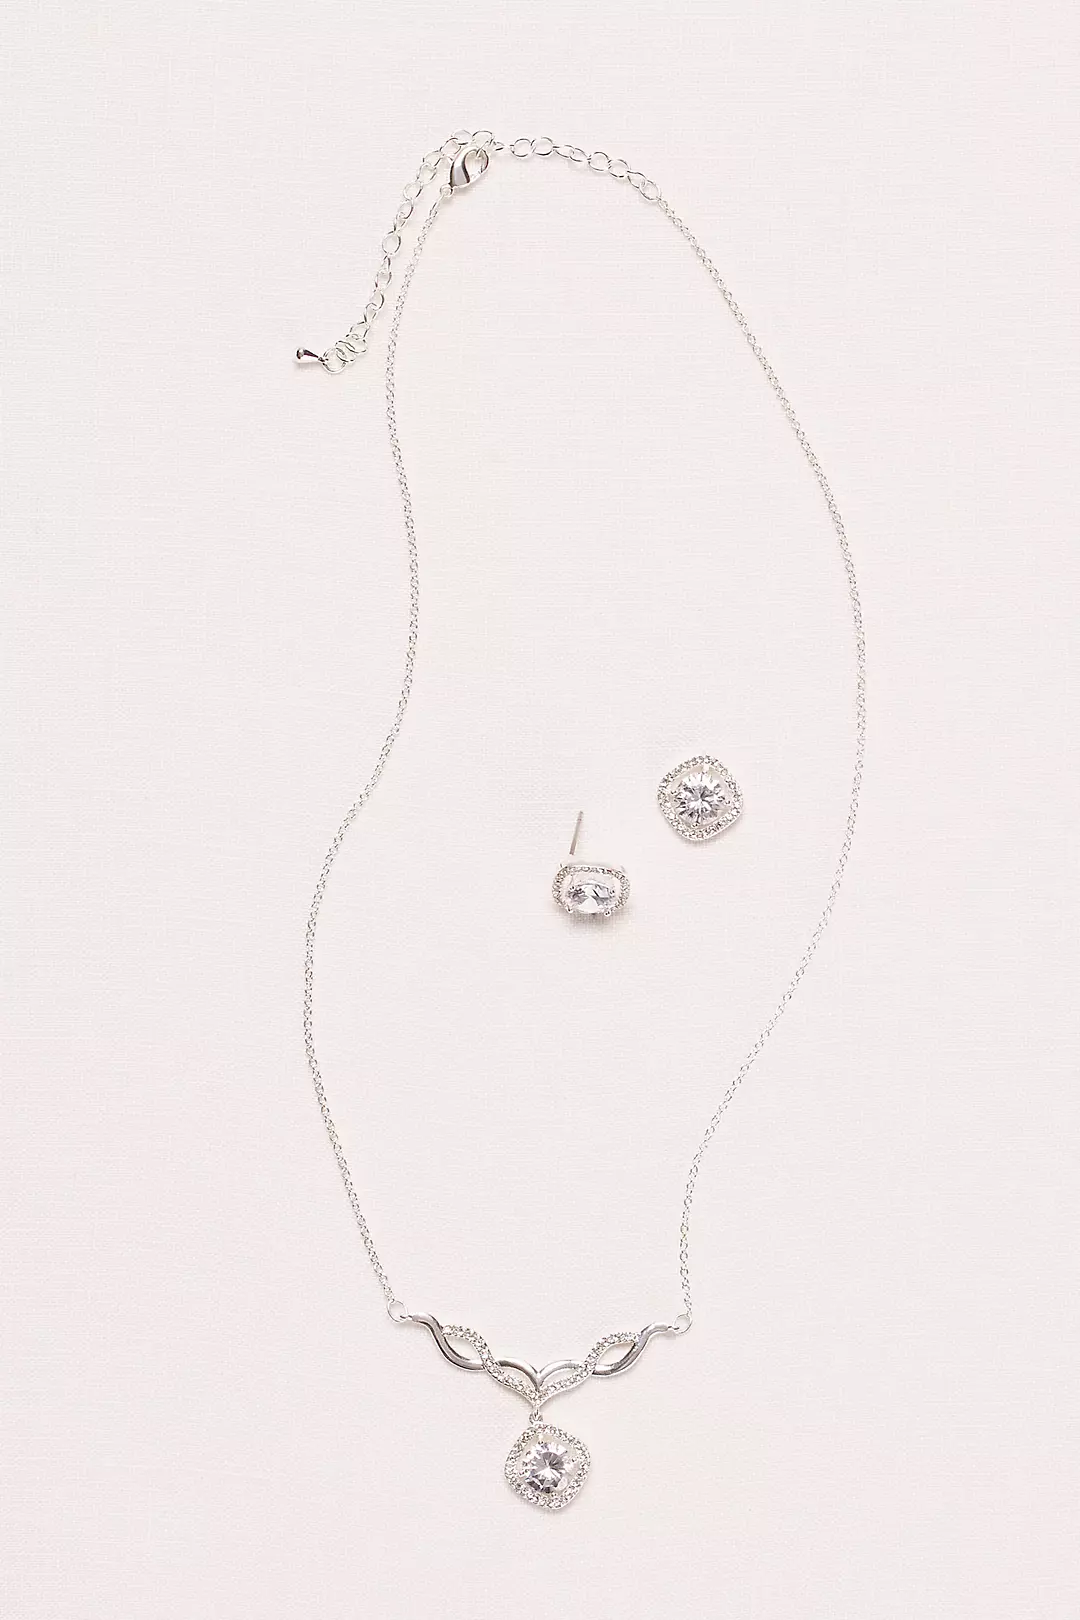 Pave Drop Pendant Necklace and Earring Set Image